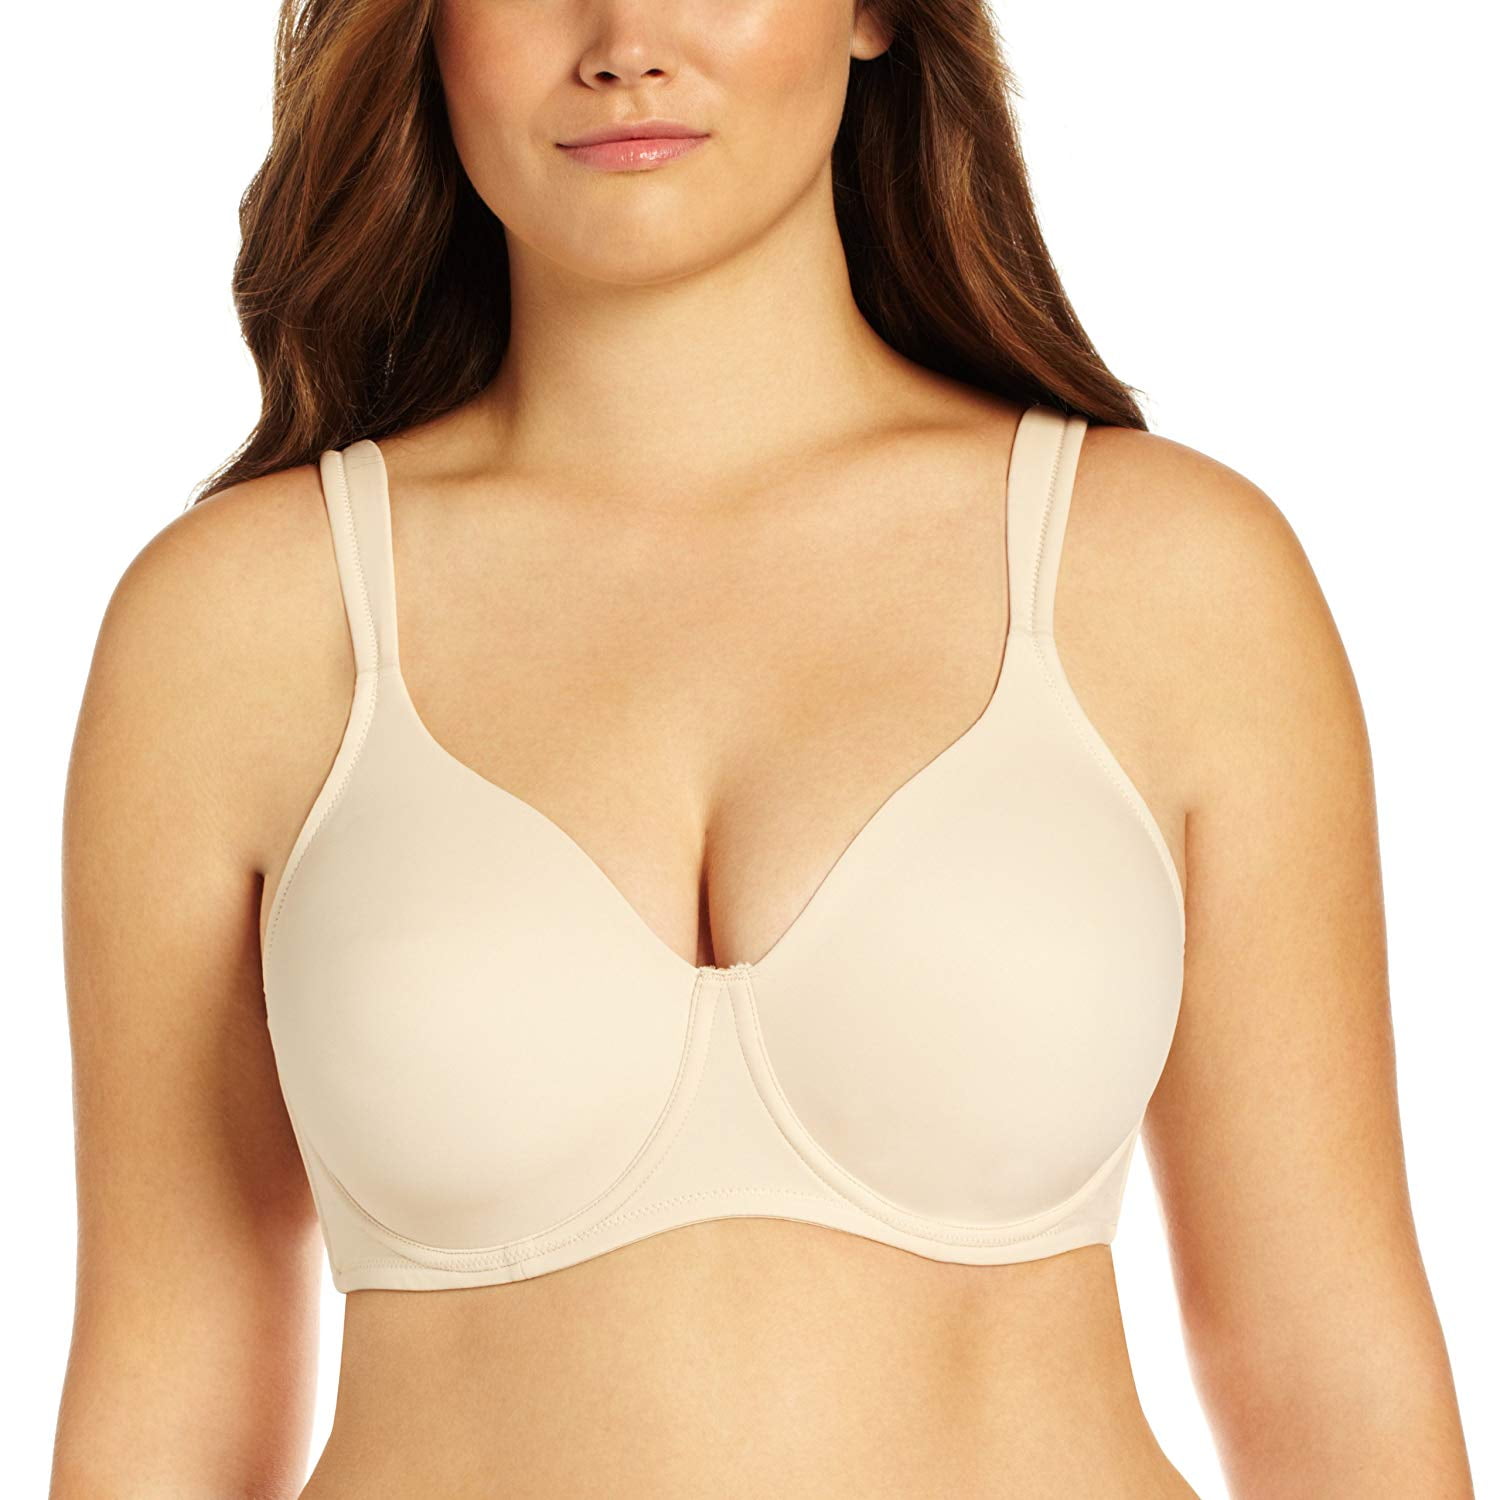 LEADING LADY Nude Molded Soft Cup Bra, US 36G, UK 36F, NWOT